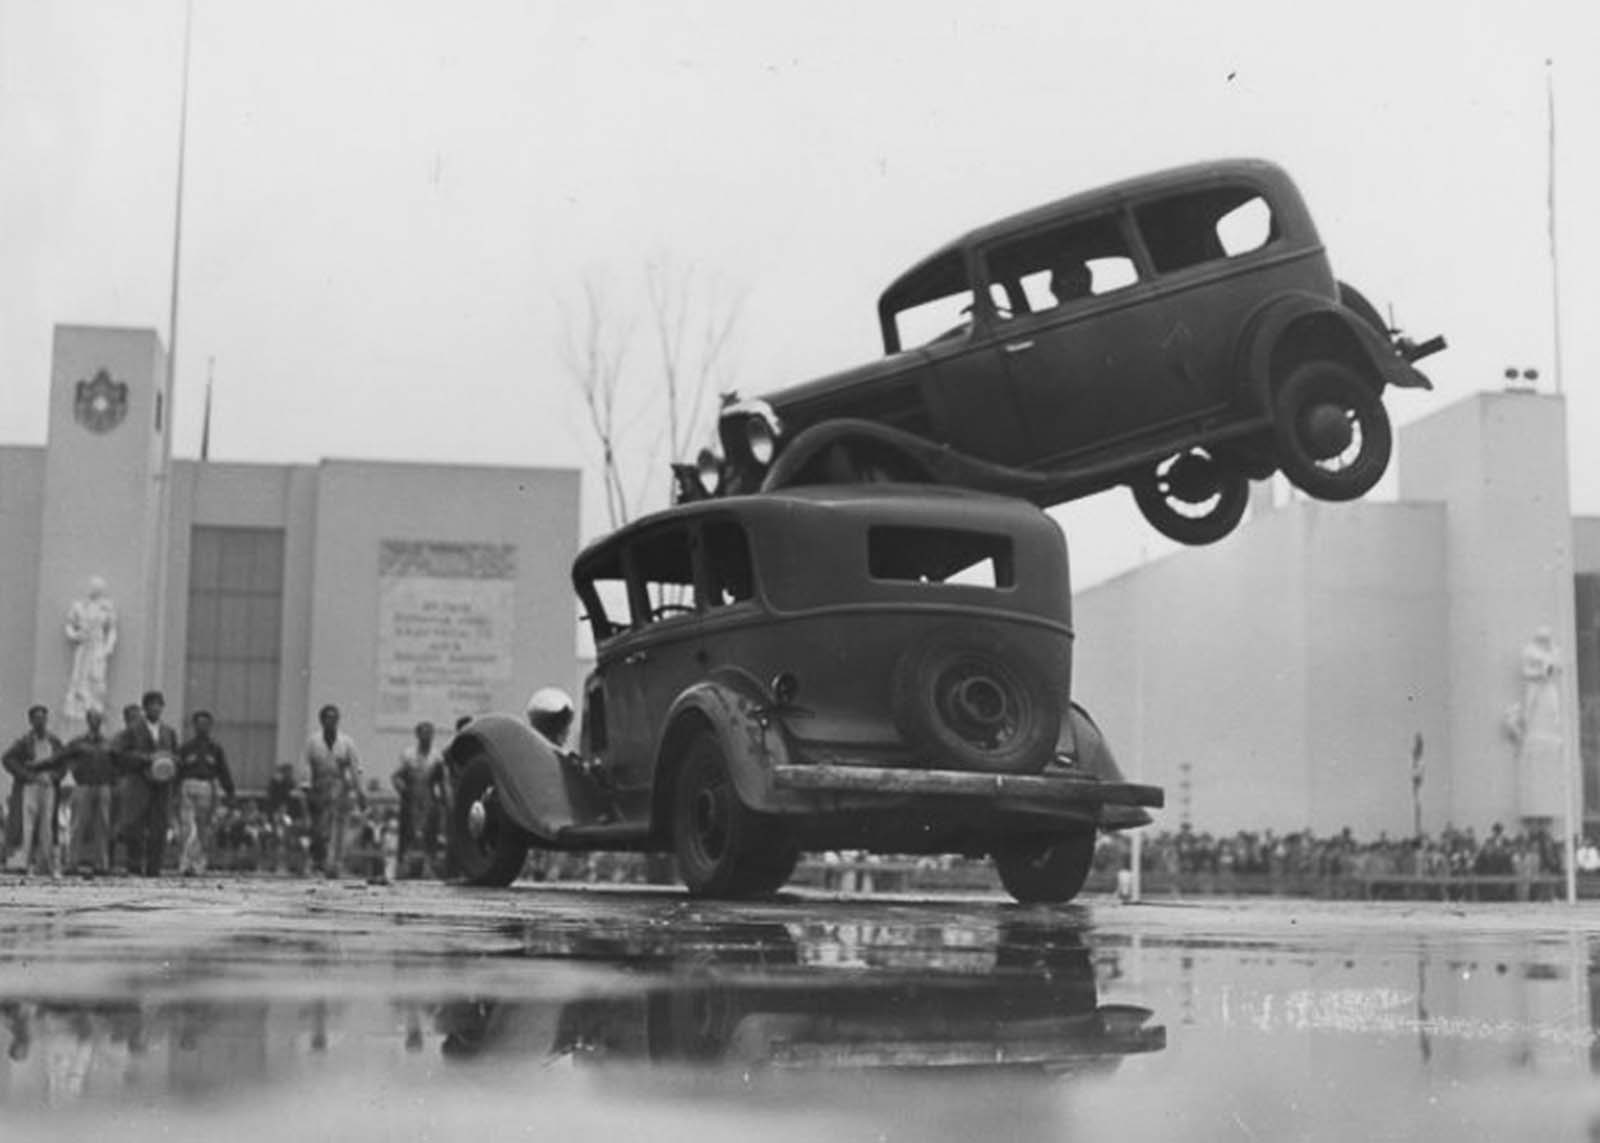 The Daredevil Stunt Drivers who entertained Crowds by Crashing Cars and flying Cars